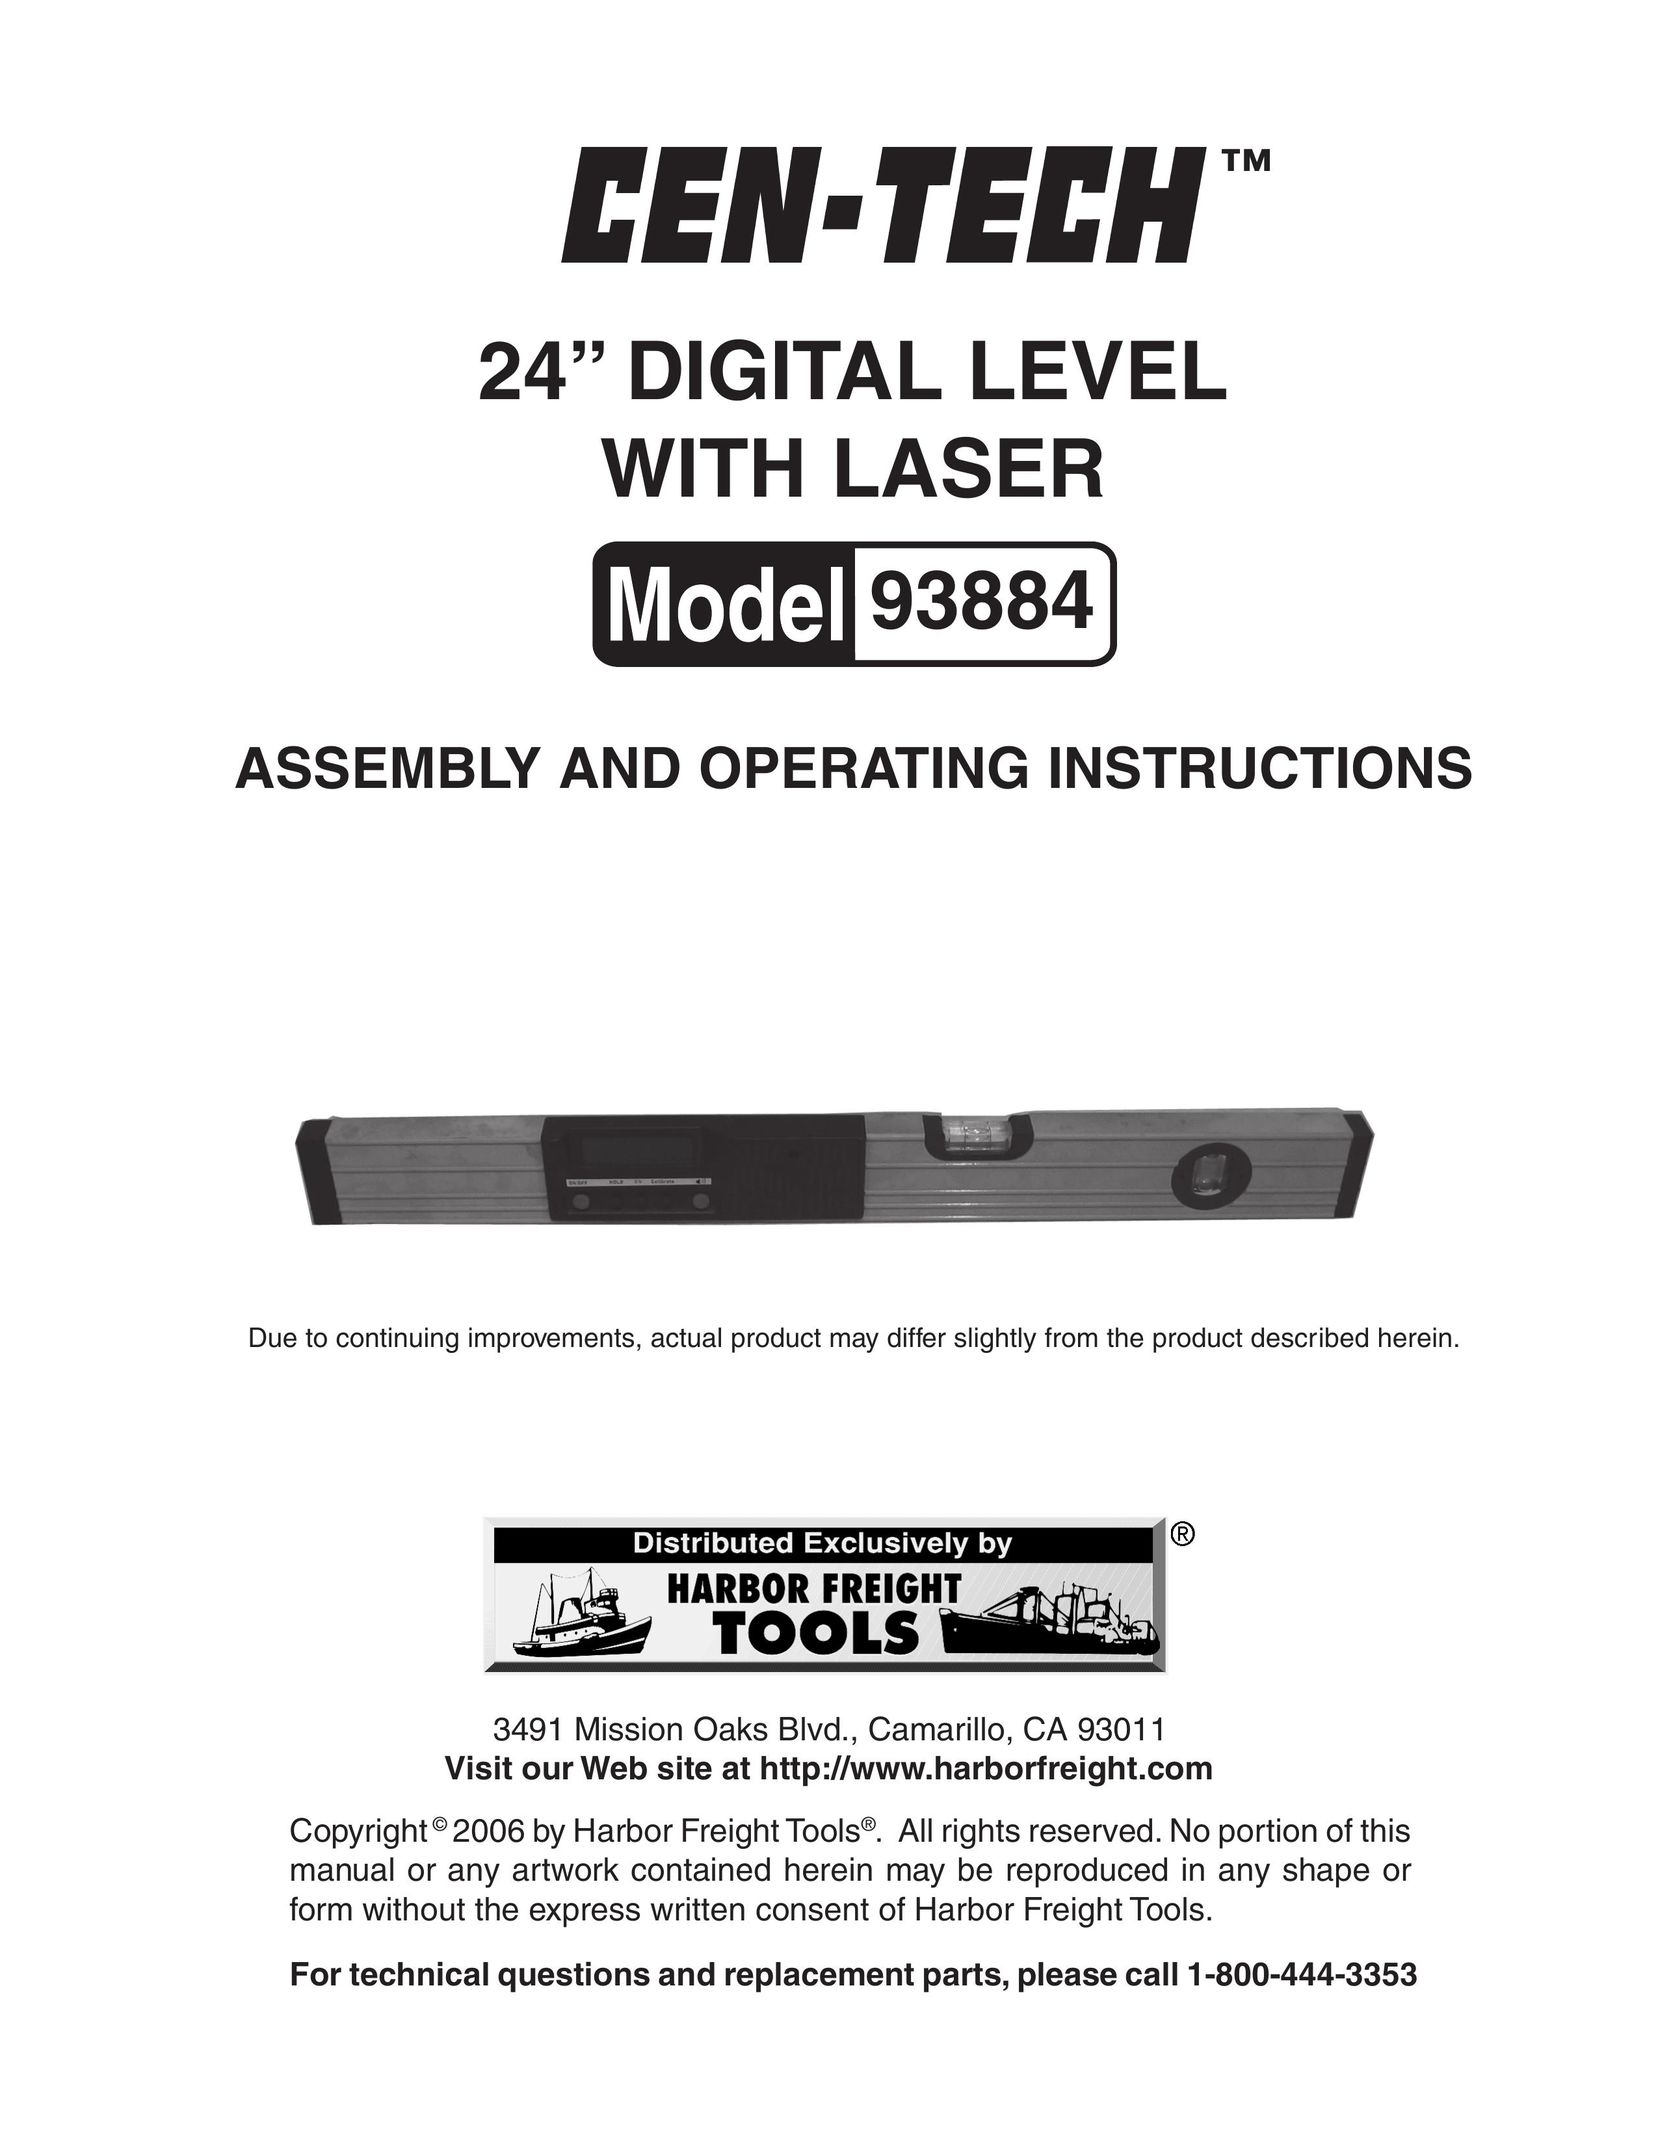 Harbor Freight Tools 93884 Laser Level User Manual